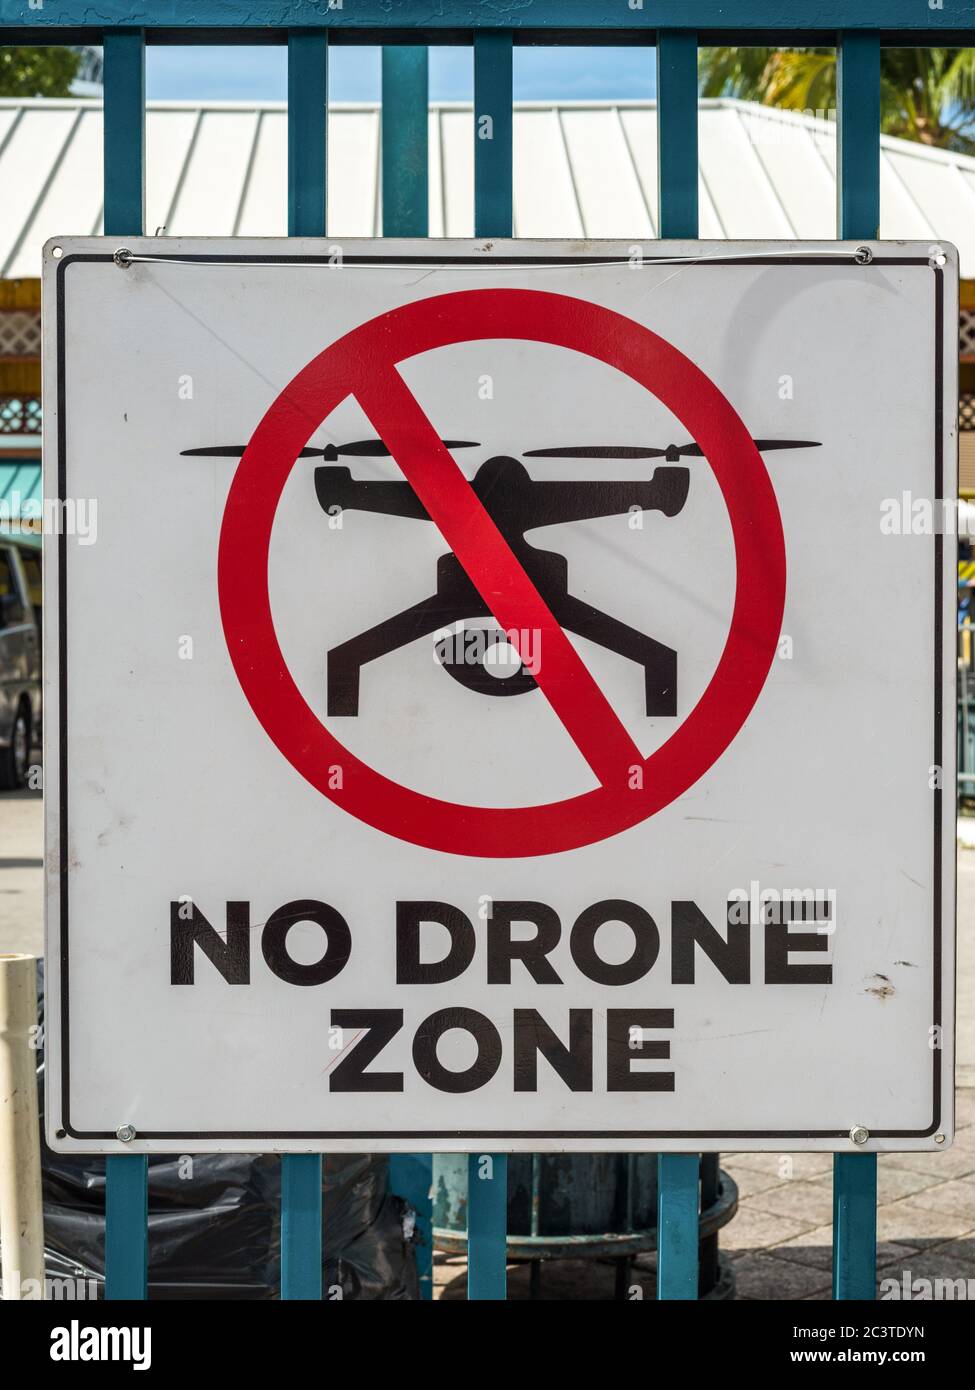 No Drone Zone Sign Cross Red White Metal Real Outdoors Tourist Location Entry Warning Stock Photo